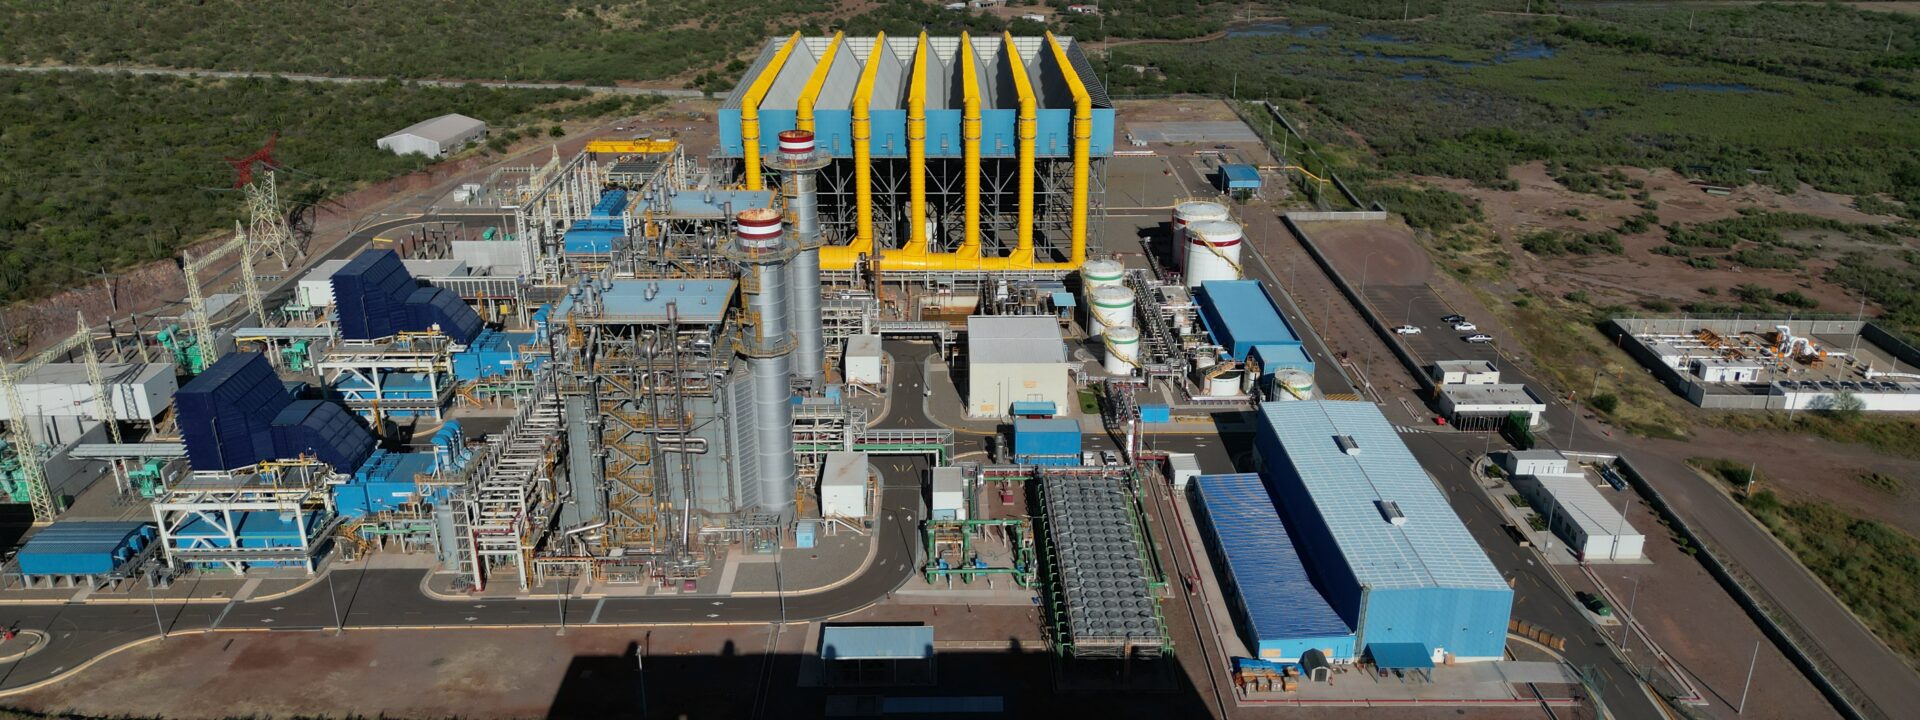 Iberdrola’s 766 MW gas turbine power plant comes online in Mexico